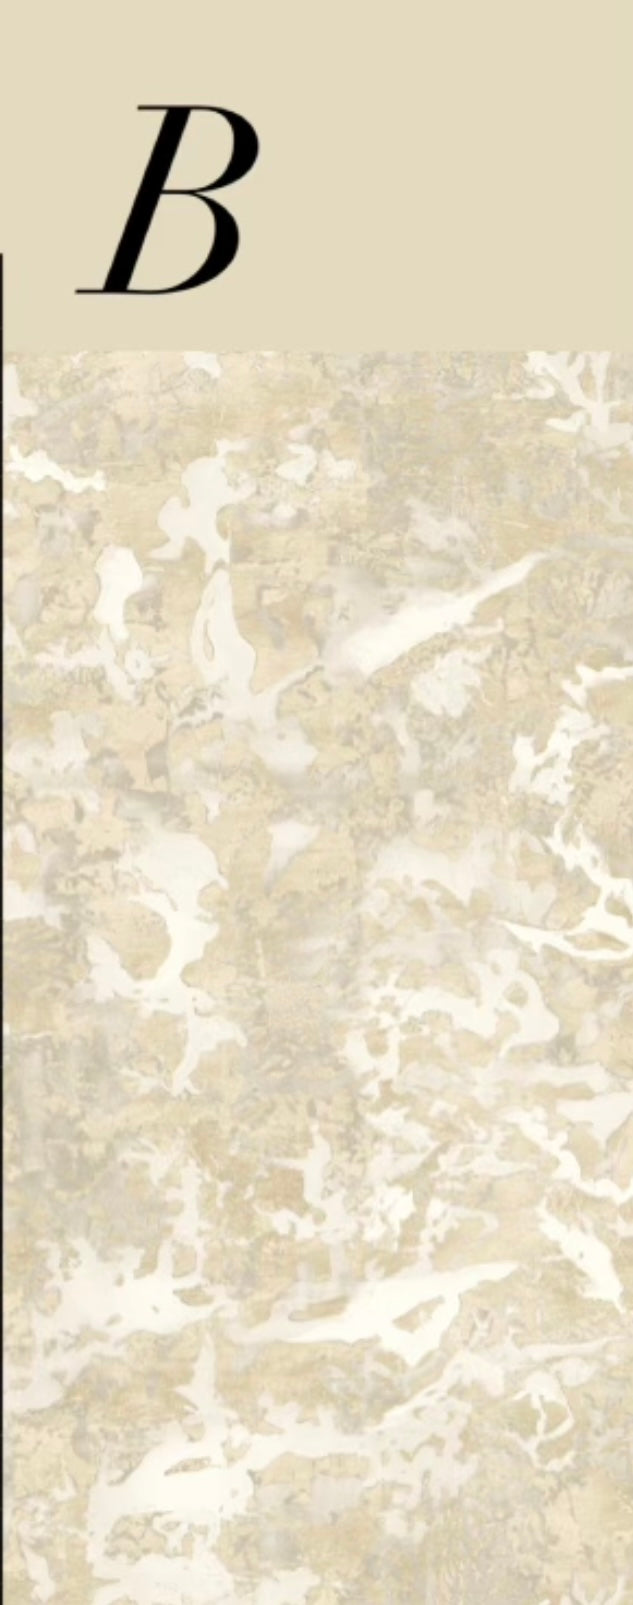 PATINA WALLPAPER: White Gold (2 Roll Pack)